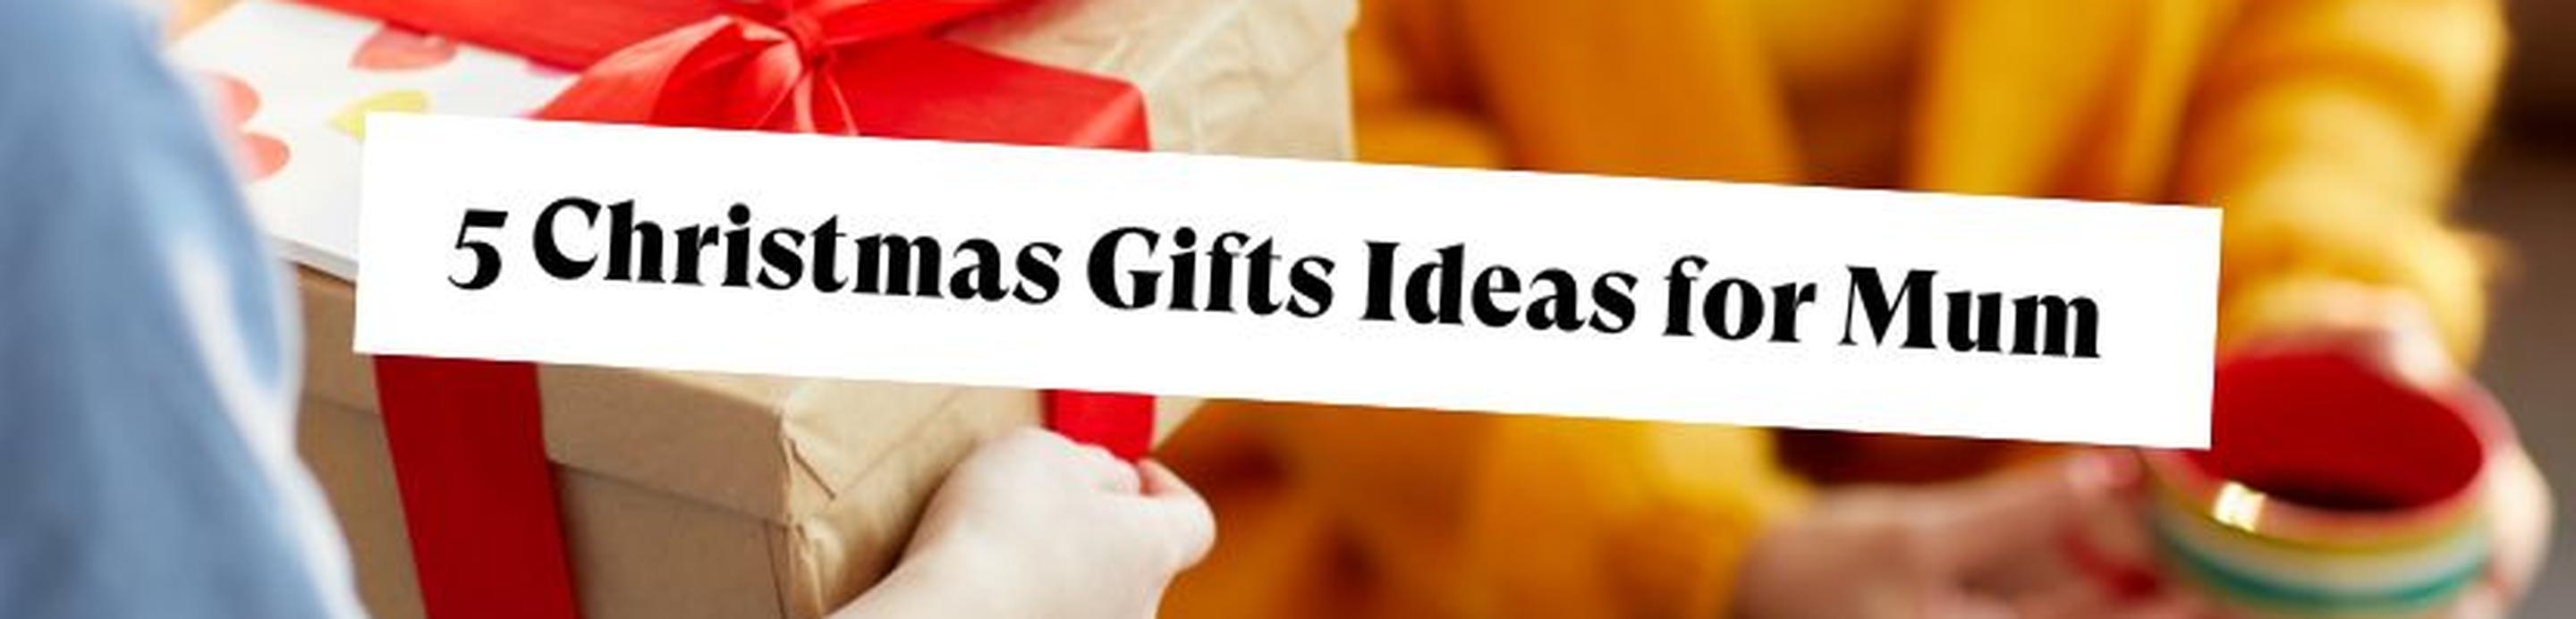 5 Christmas gift ideas for your mum